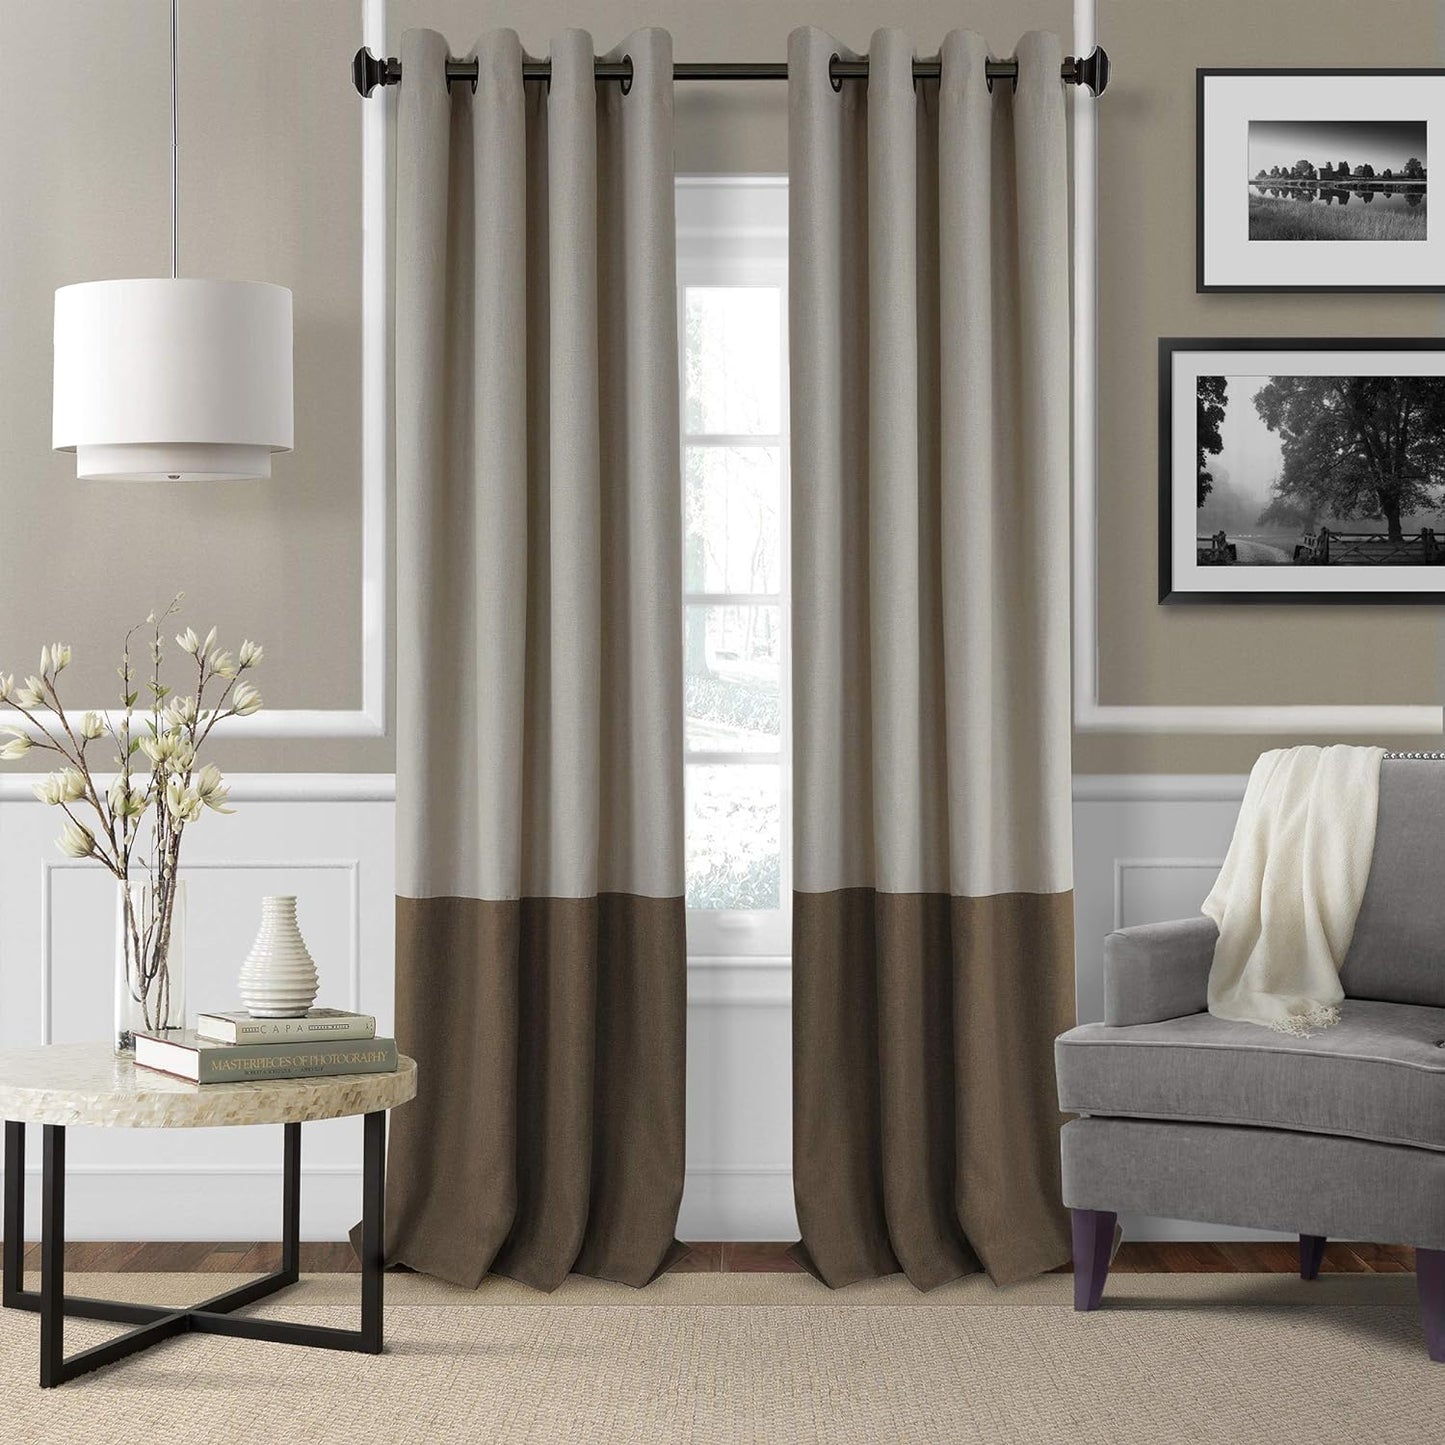 Elrene Home Fashions Braiden Color-Block Blackout Window Curtain, Single Panel, 52 in X 84 in (1 Panel), Linen  Elrene Home Fashions Chocolate 52" X 95" (1 Panel) 